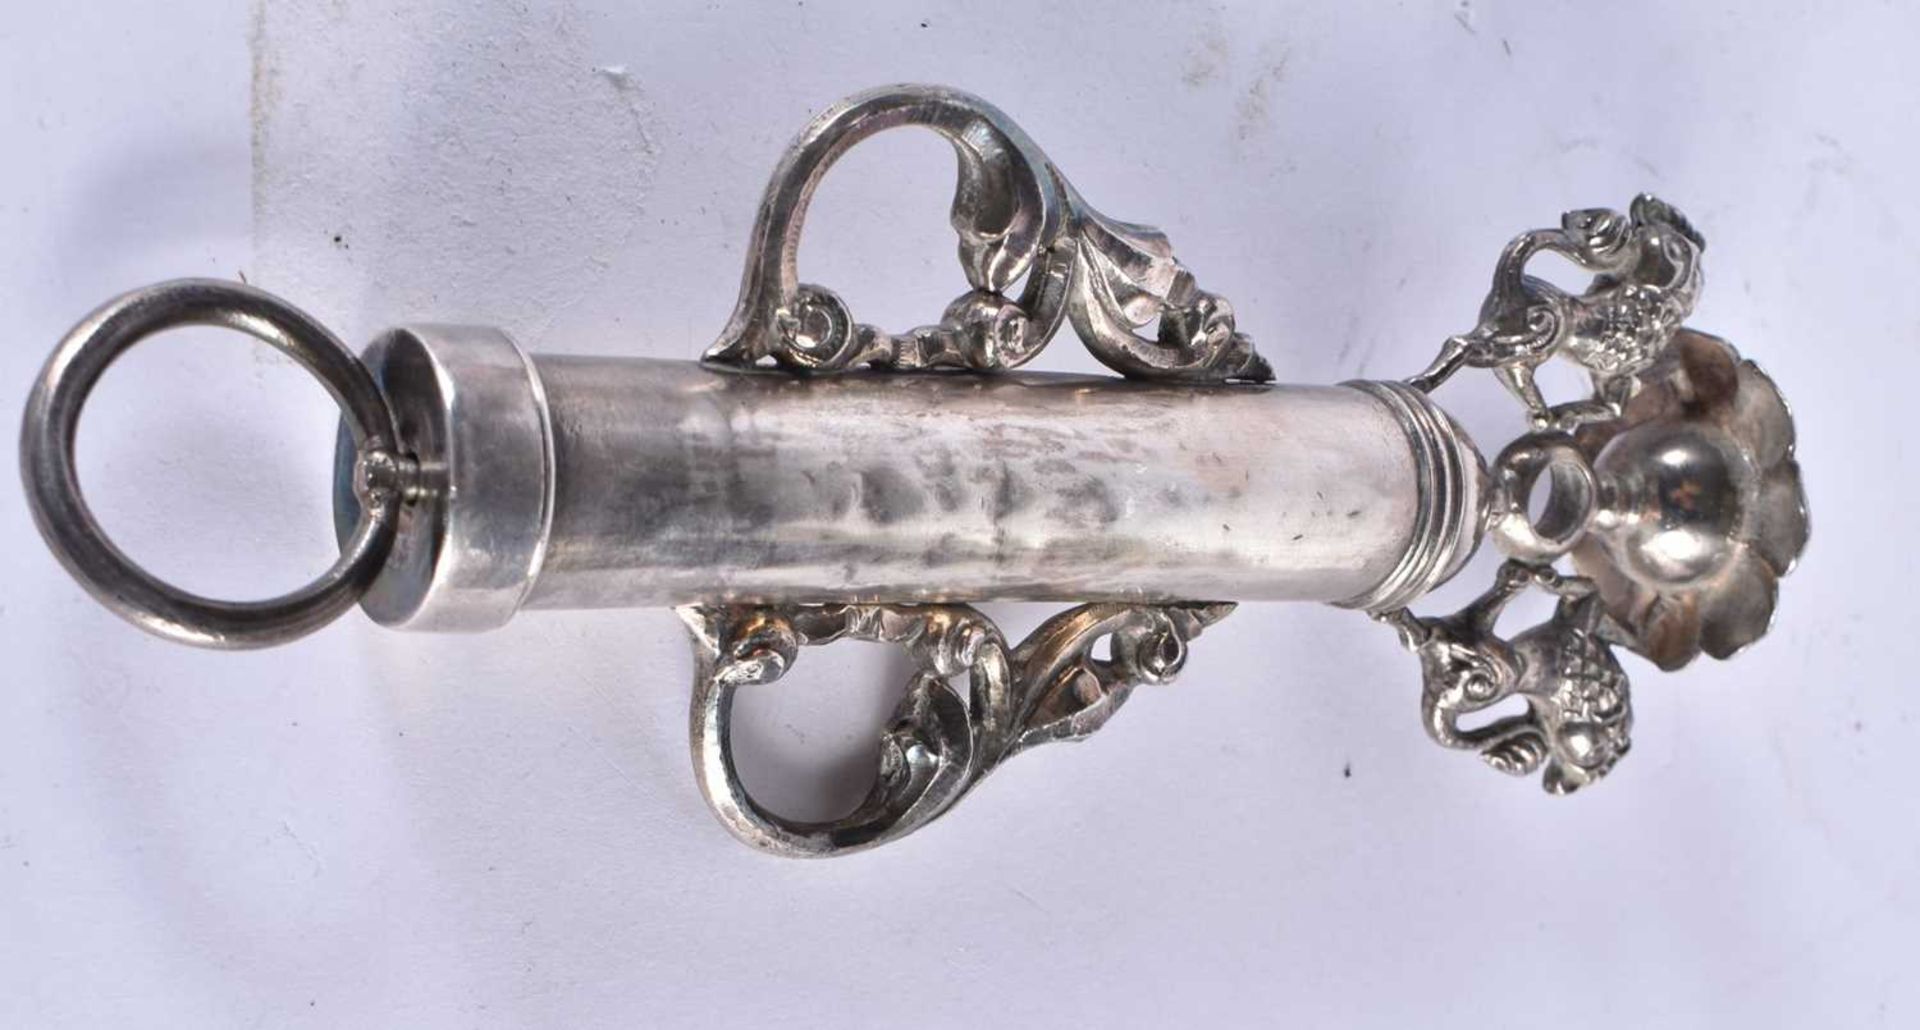 AN ANTIQUE INDIAN SILVER INSTRUMENT. 176 grams. 22 cm long. - Image 3 of 4